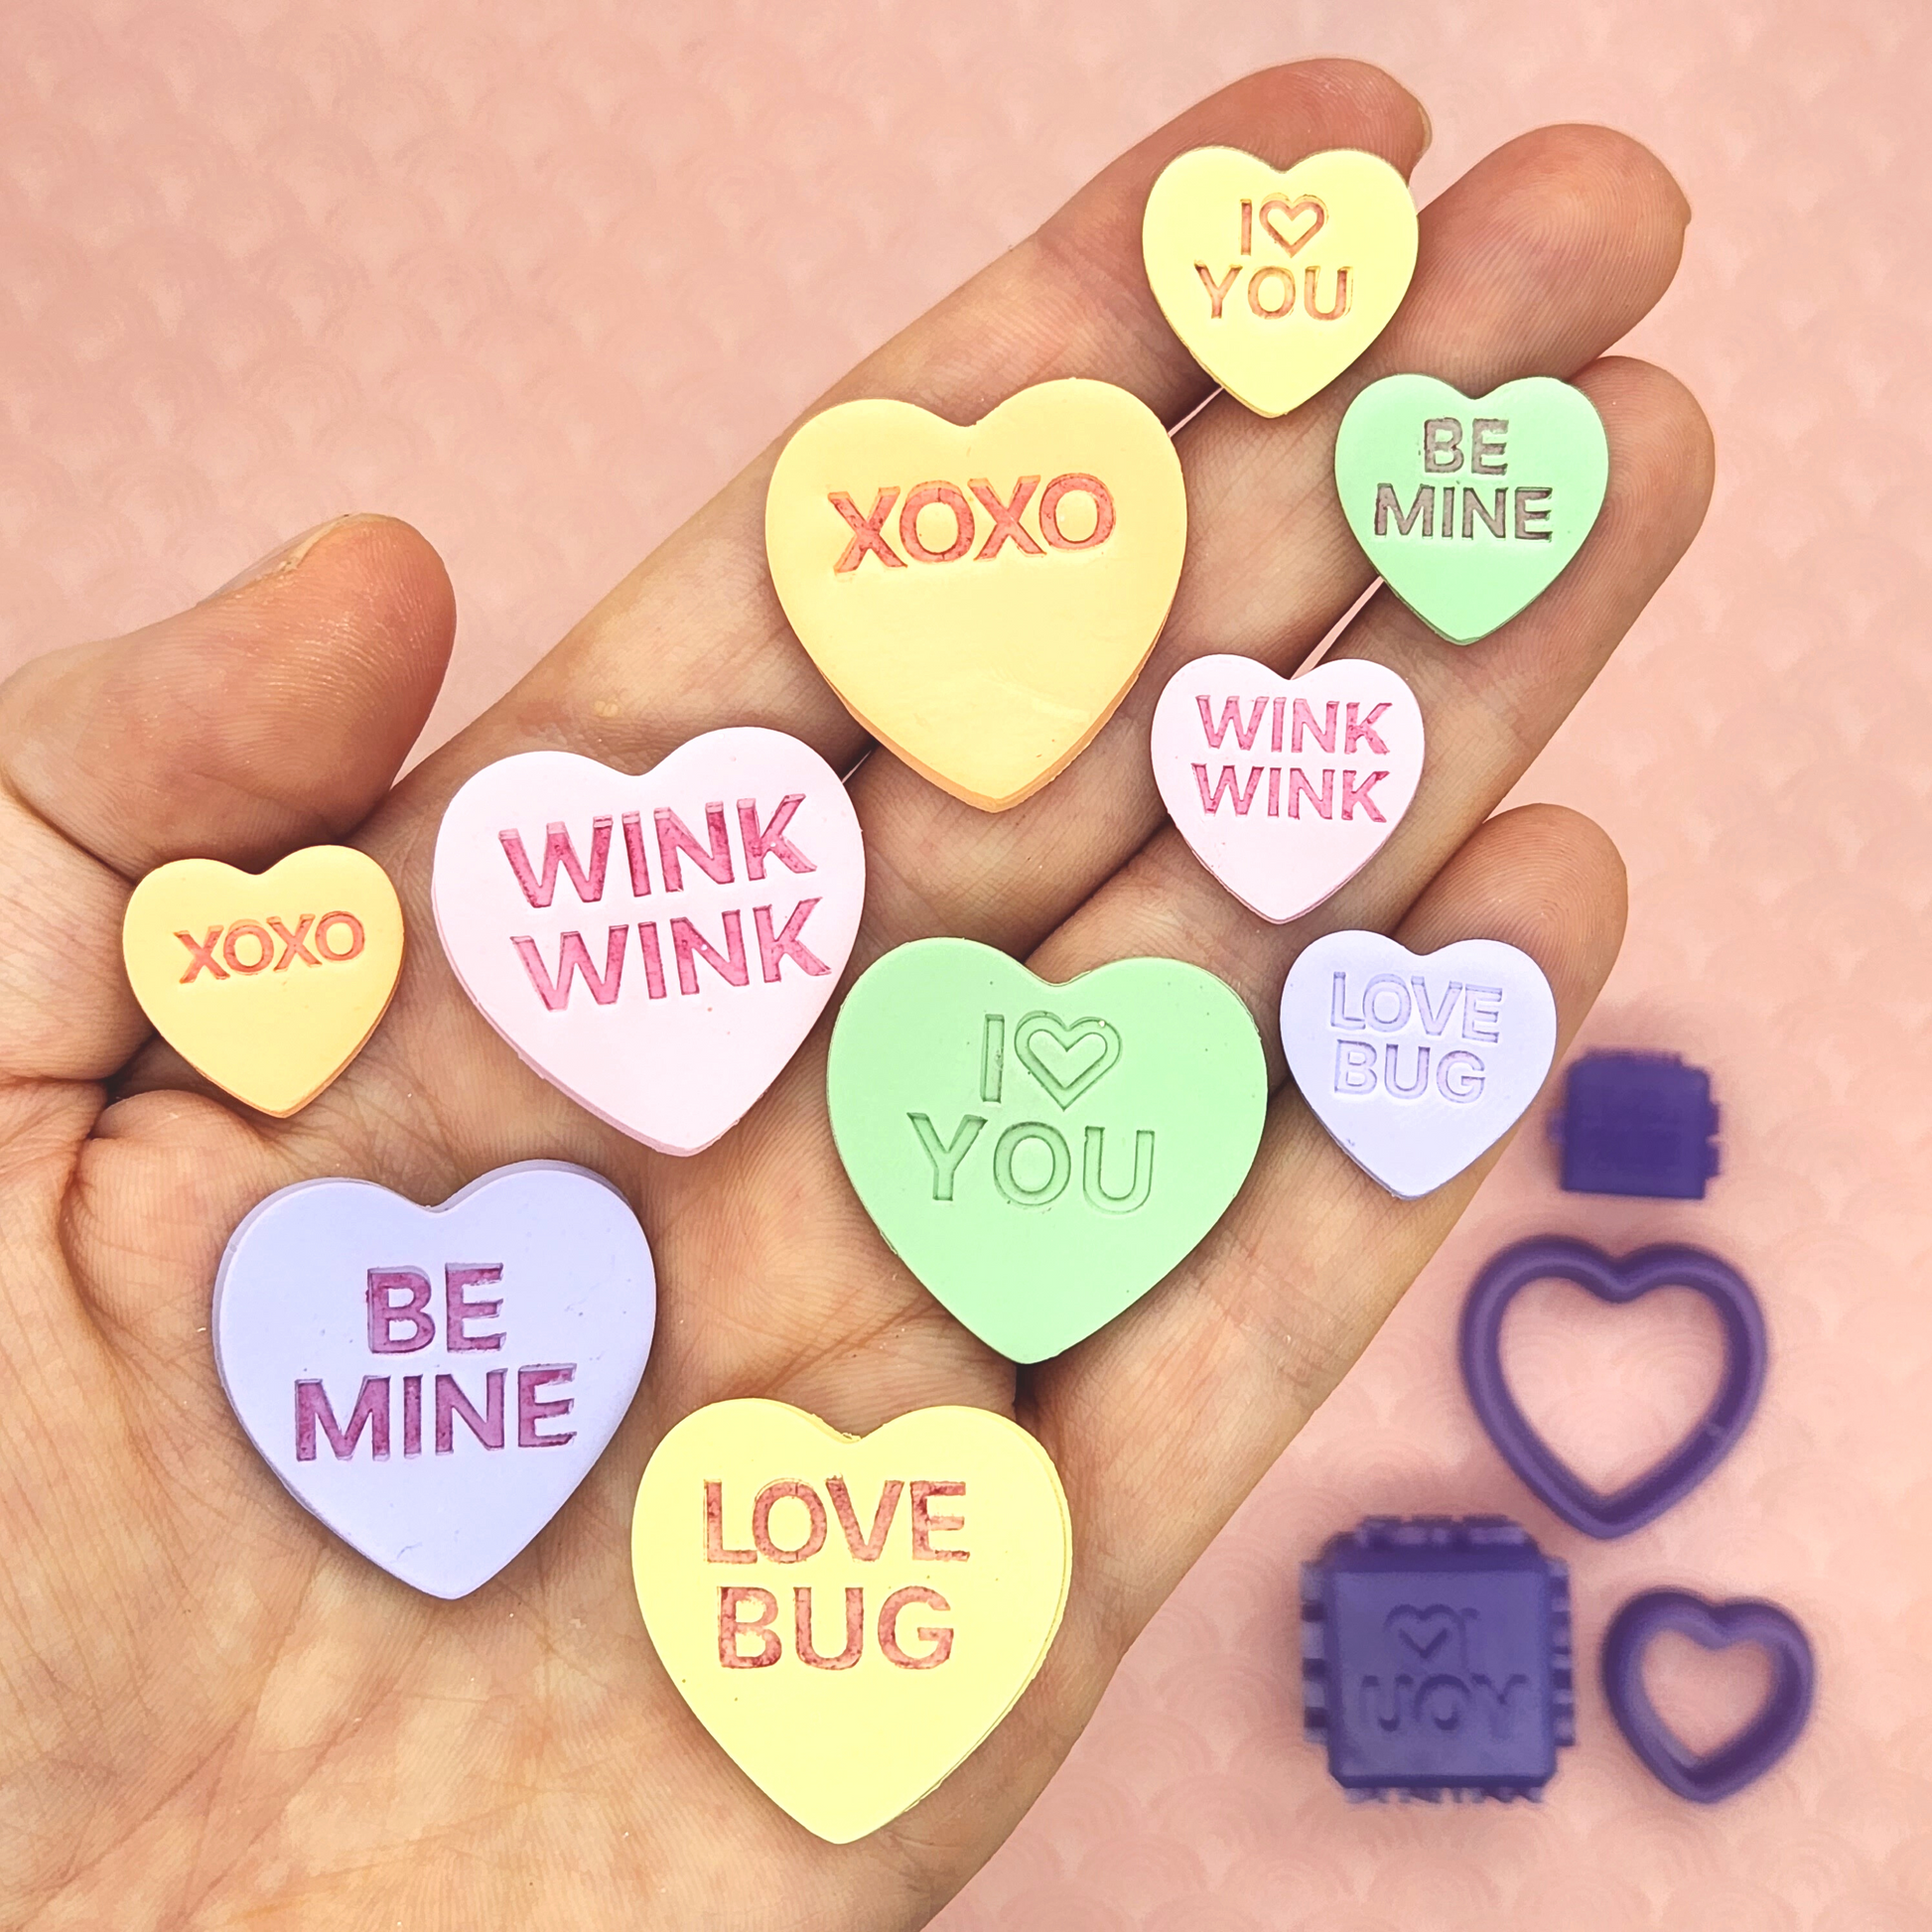 candy conversation hearts on polymer clay with words "I 🤍 YOU", "BE MINE", "WINK WINK", "XOXO", and "LOVE BUG". Sample finish product